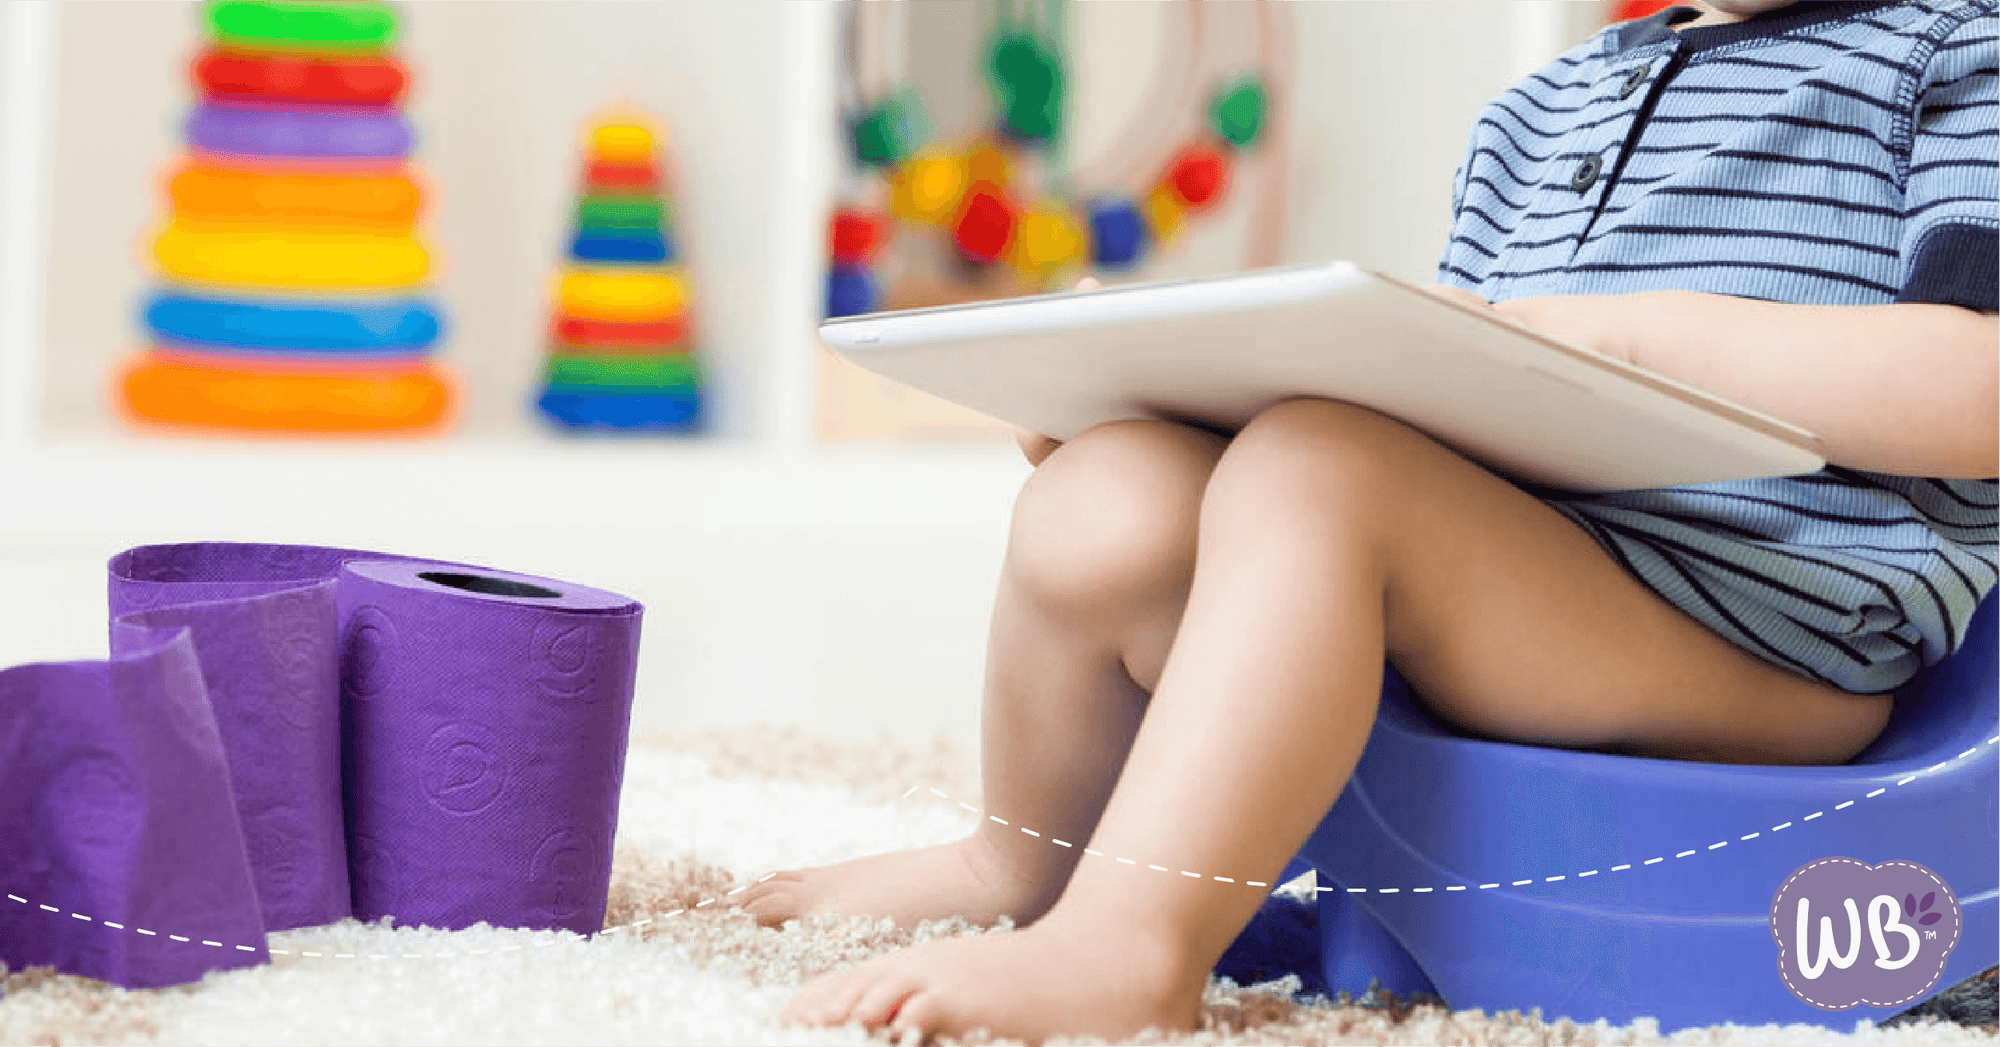 Here’s The Only Thing You Need to Know About Potty Training